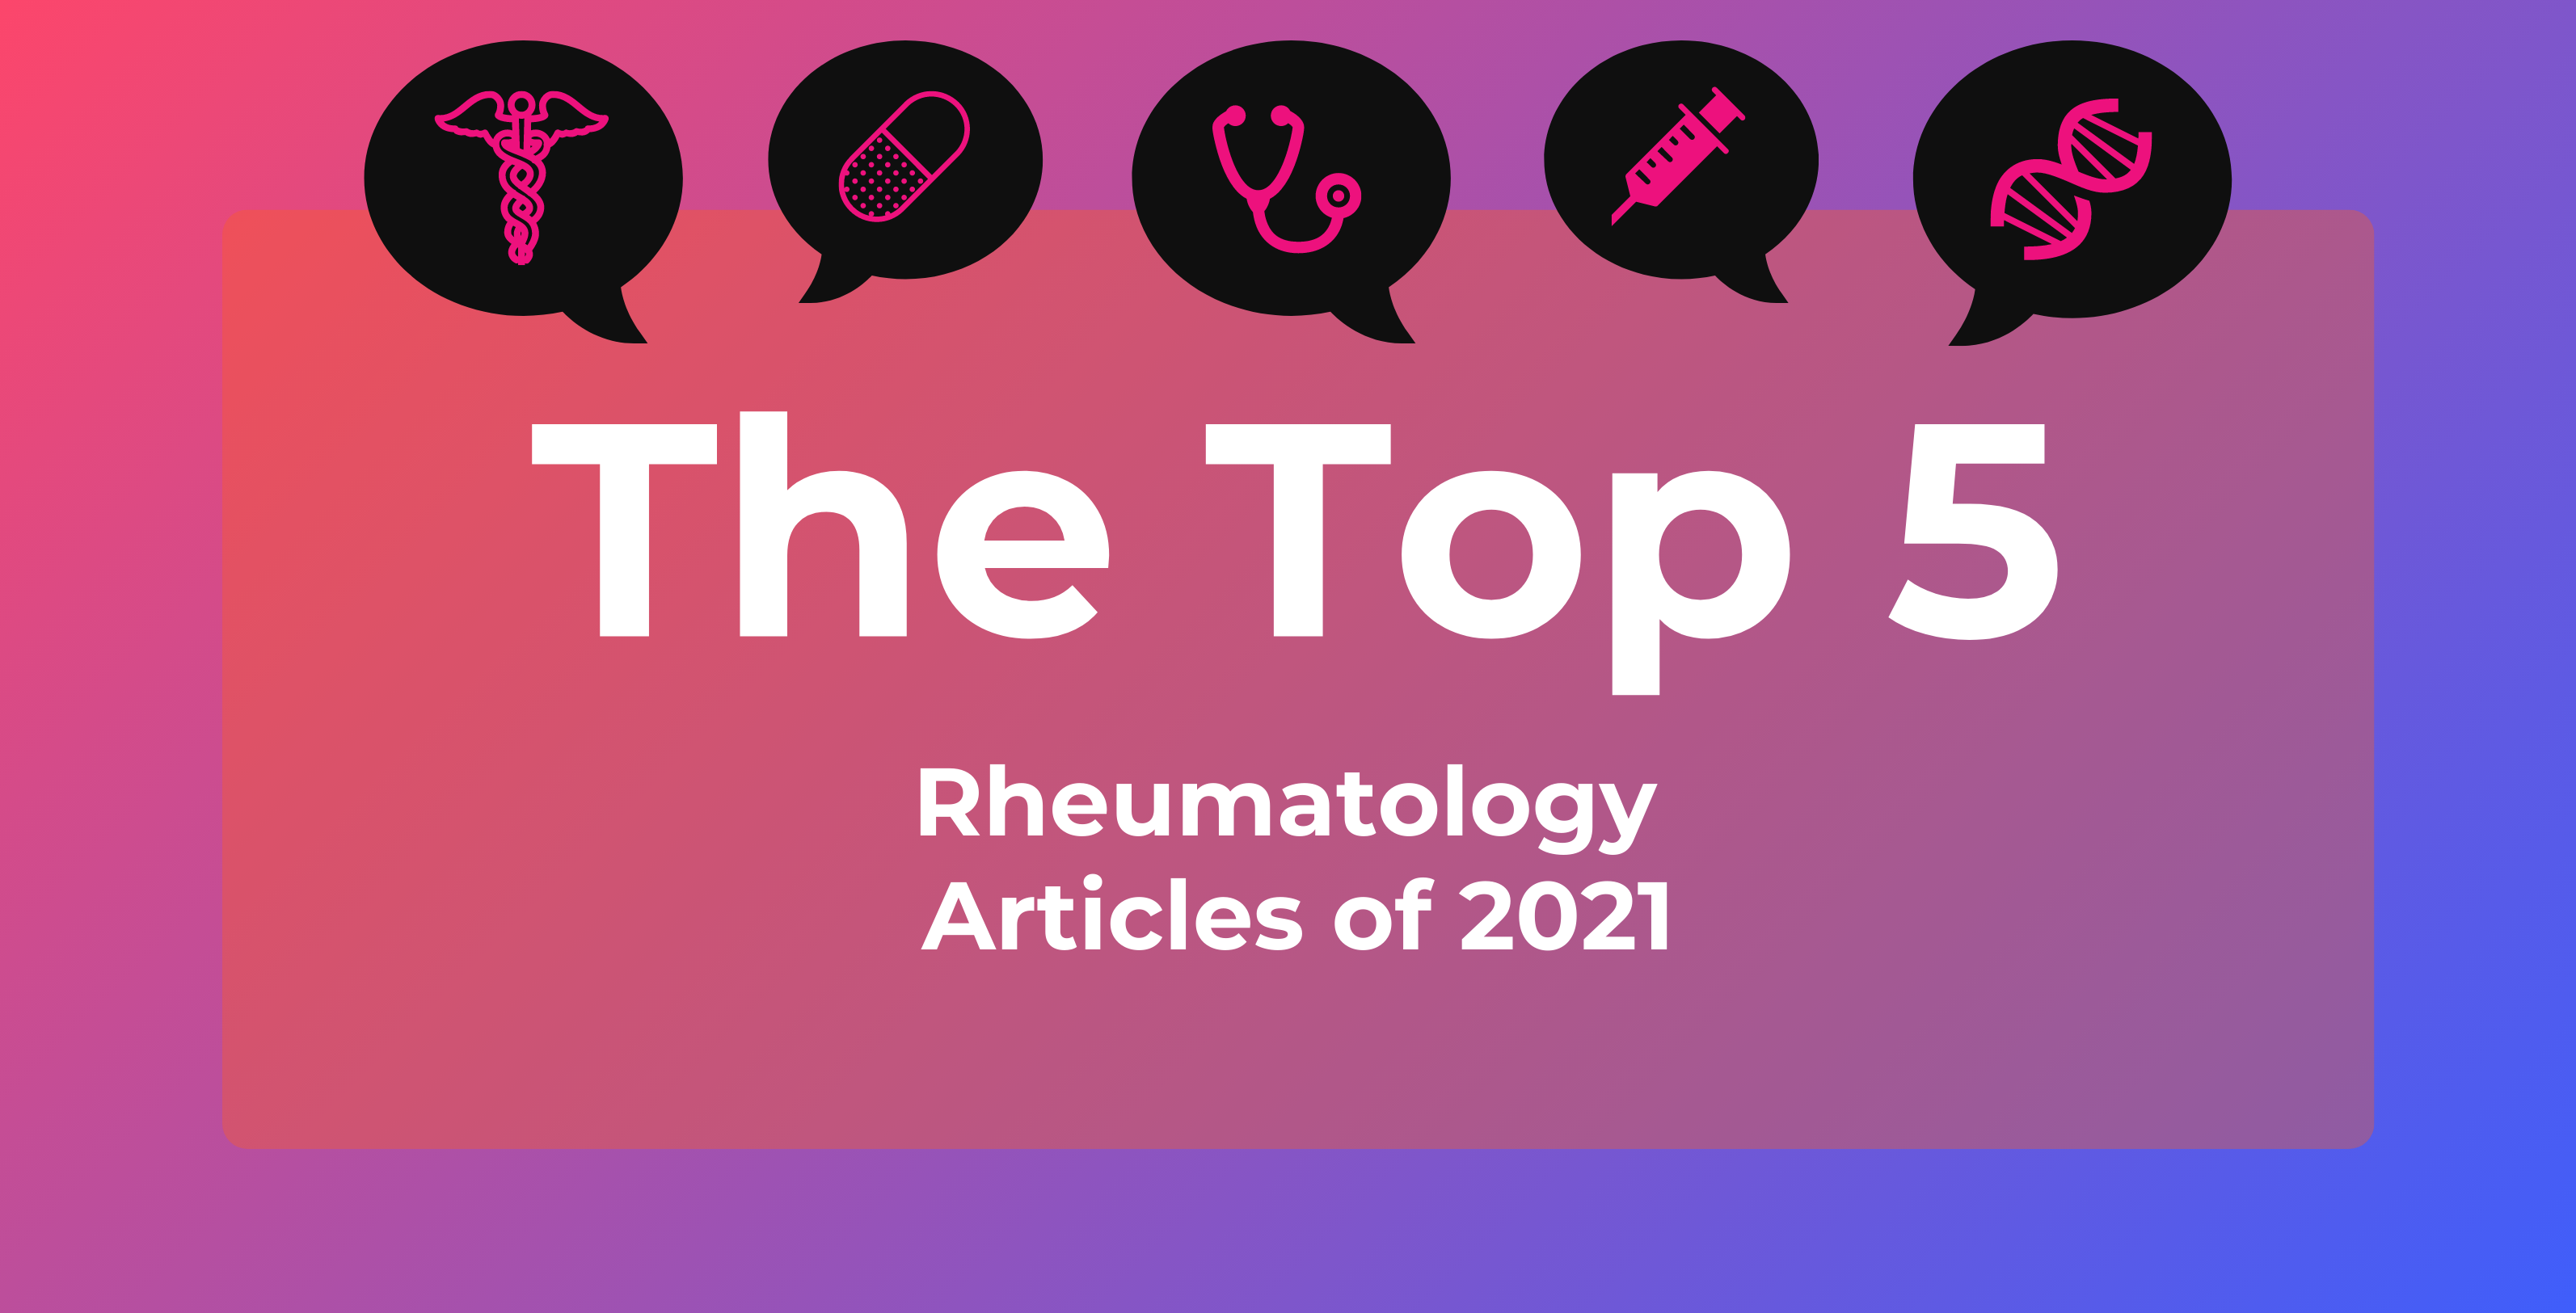 Top 5 most read rheumatology articles of 2021